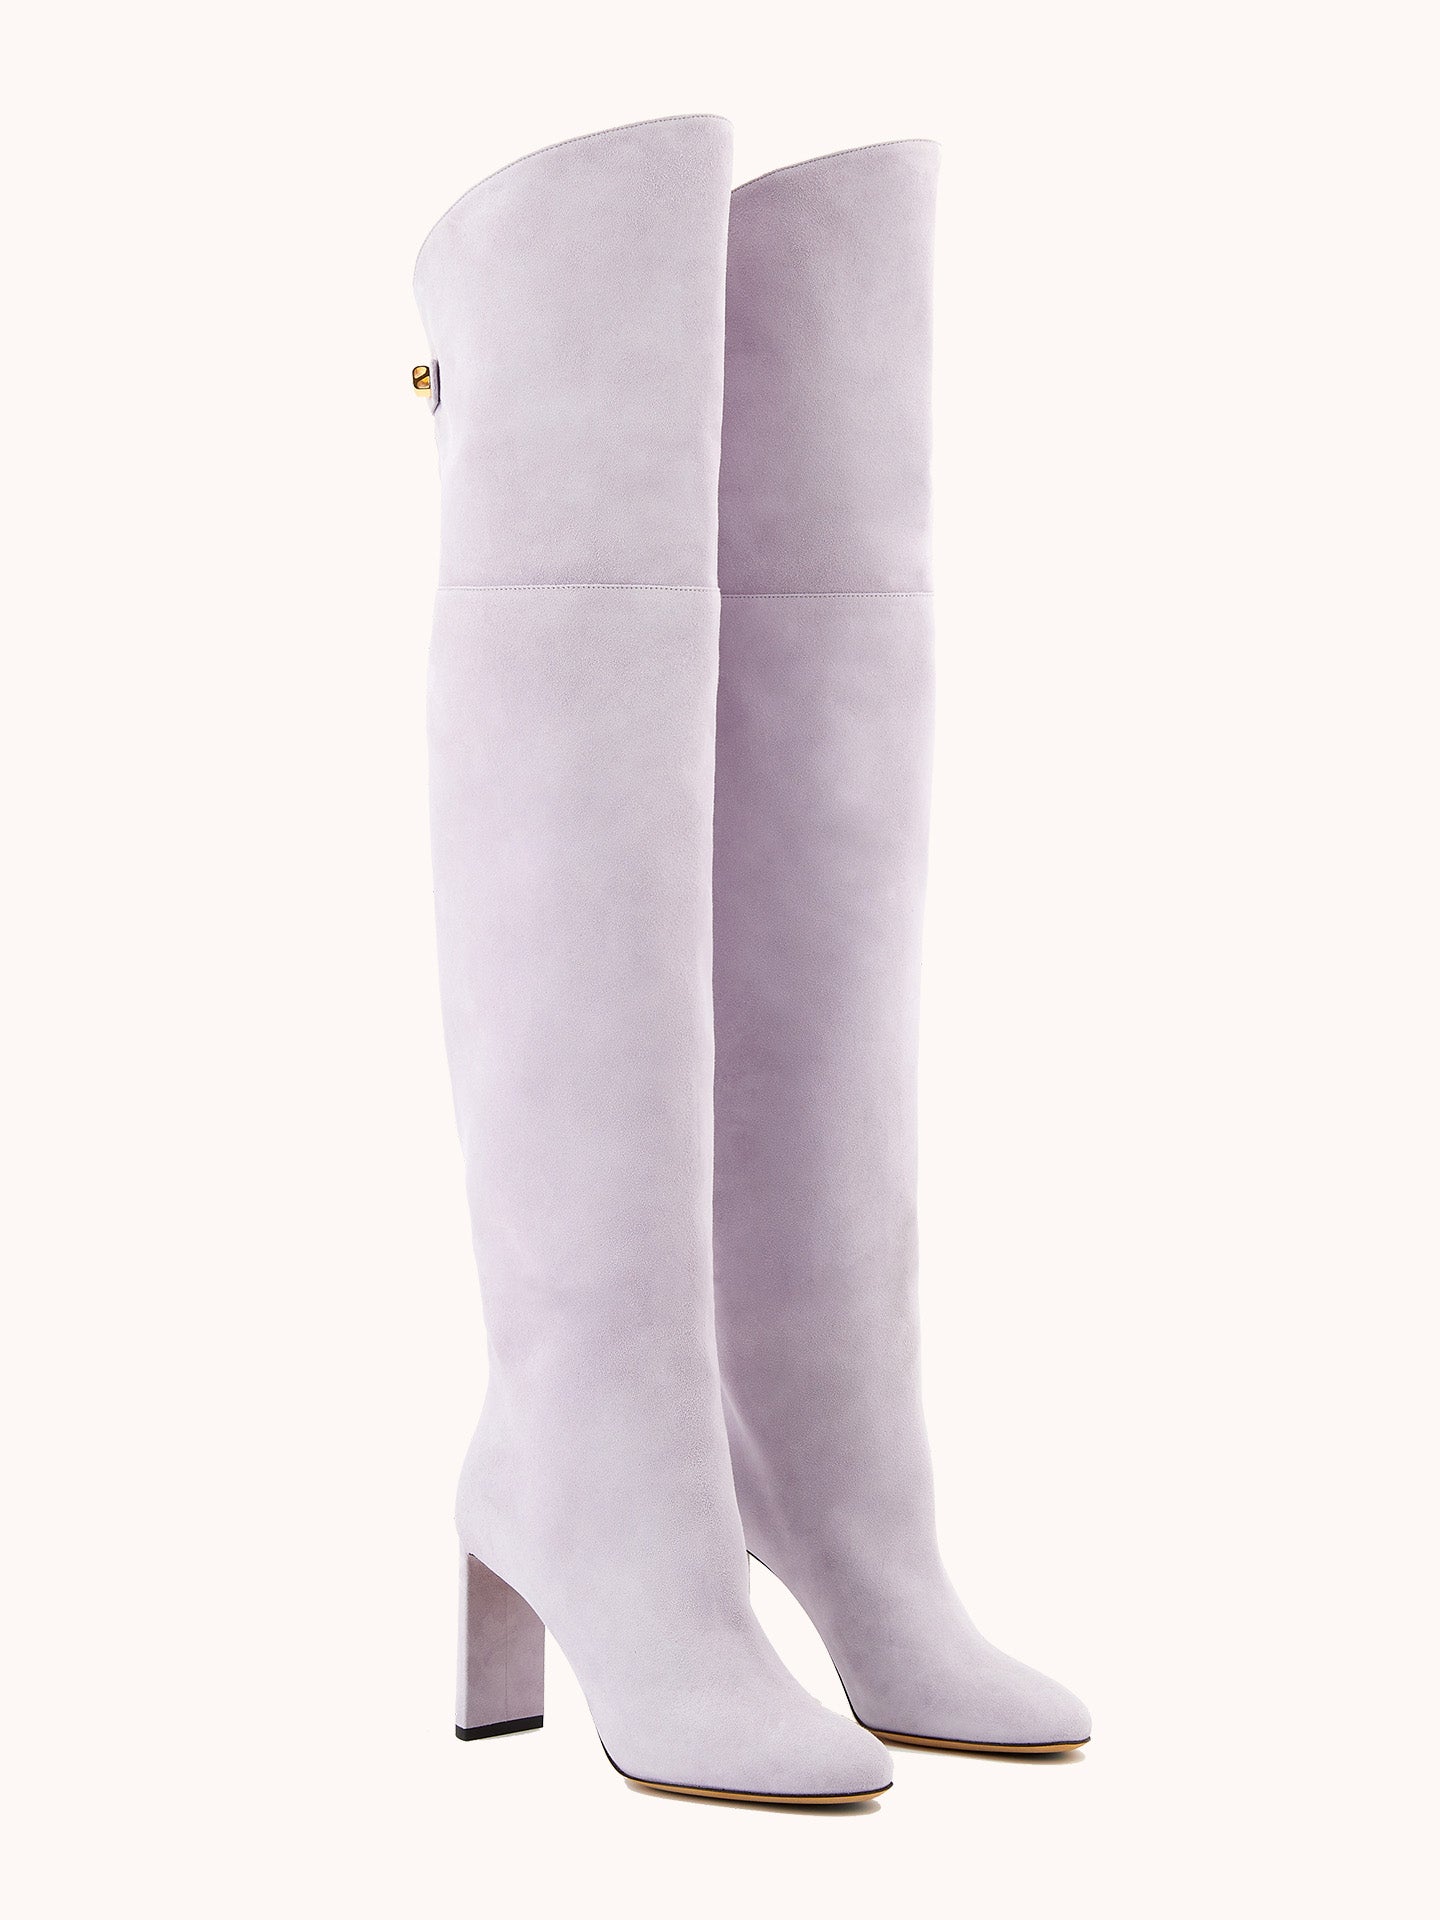 Maison Skorpios – Marylin Over The Knee Lavender Suede Boots